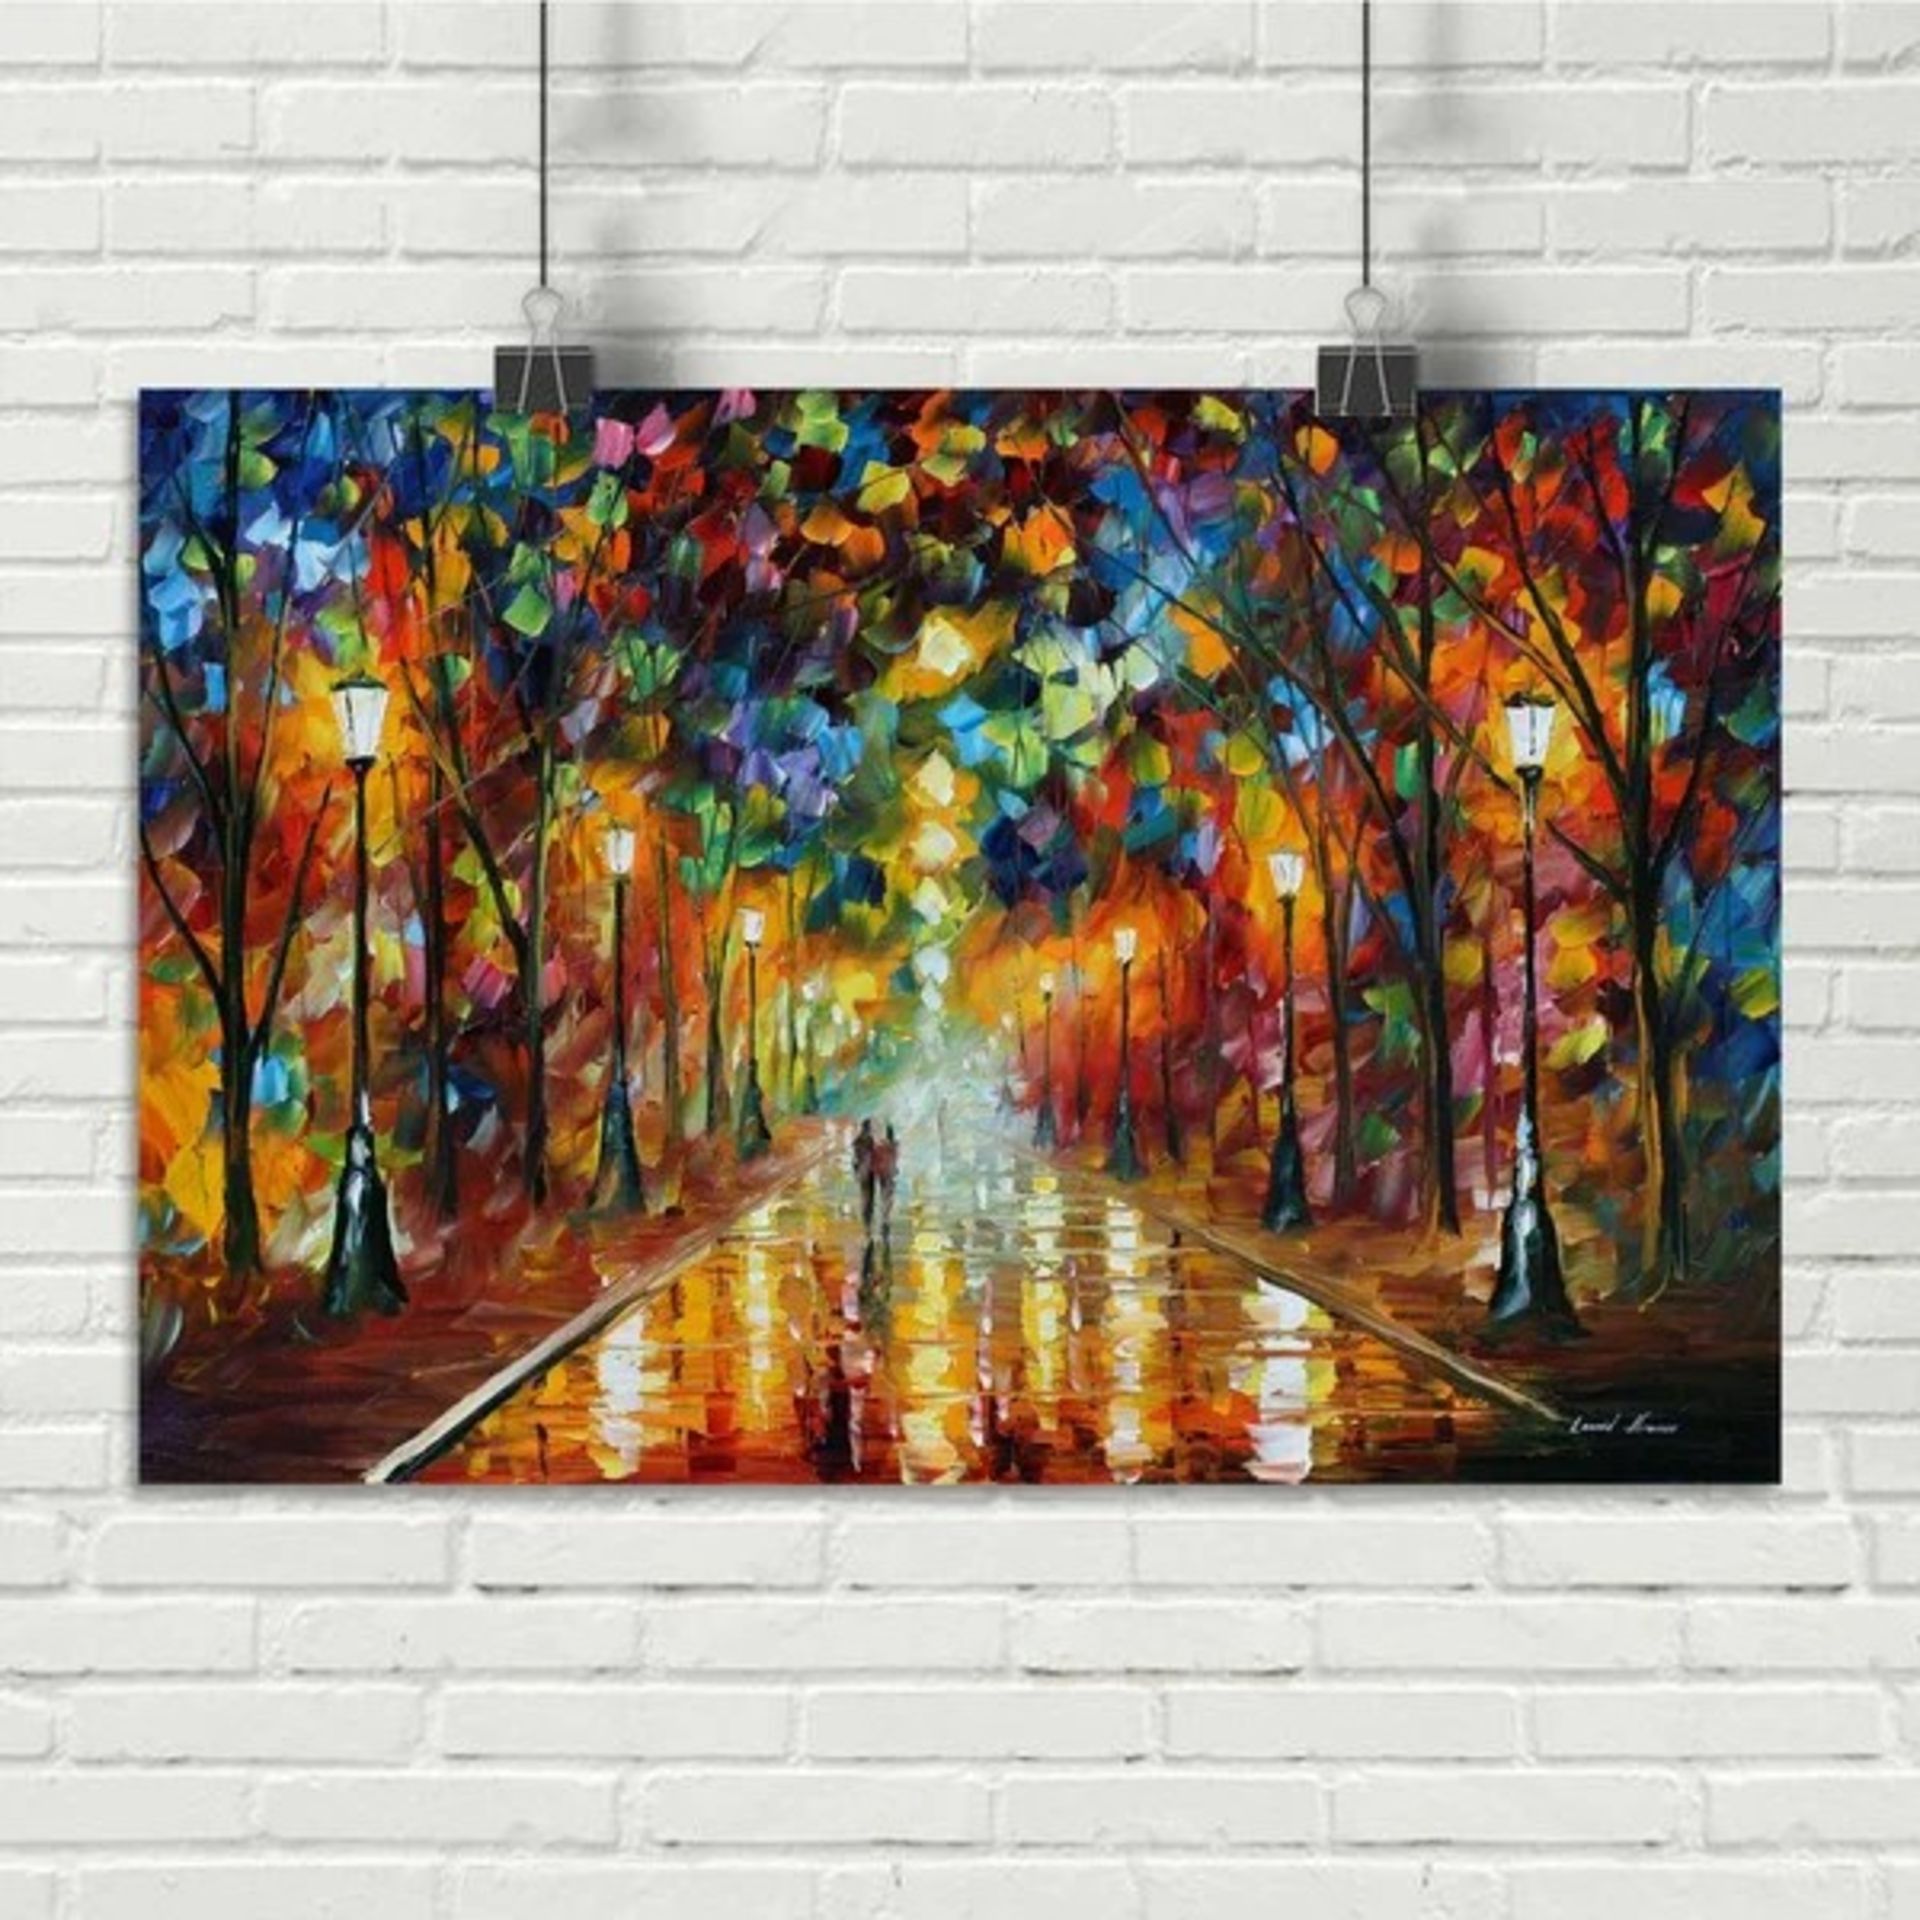 Farewell To Anger by Leonid Afremov - Print - RRP £45.99.